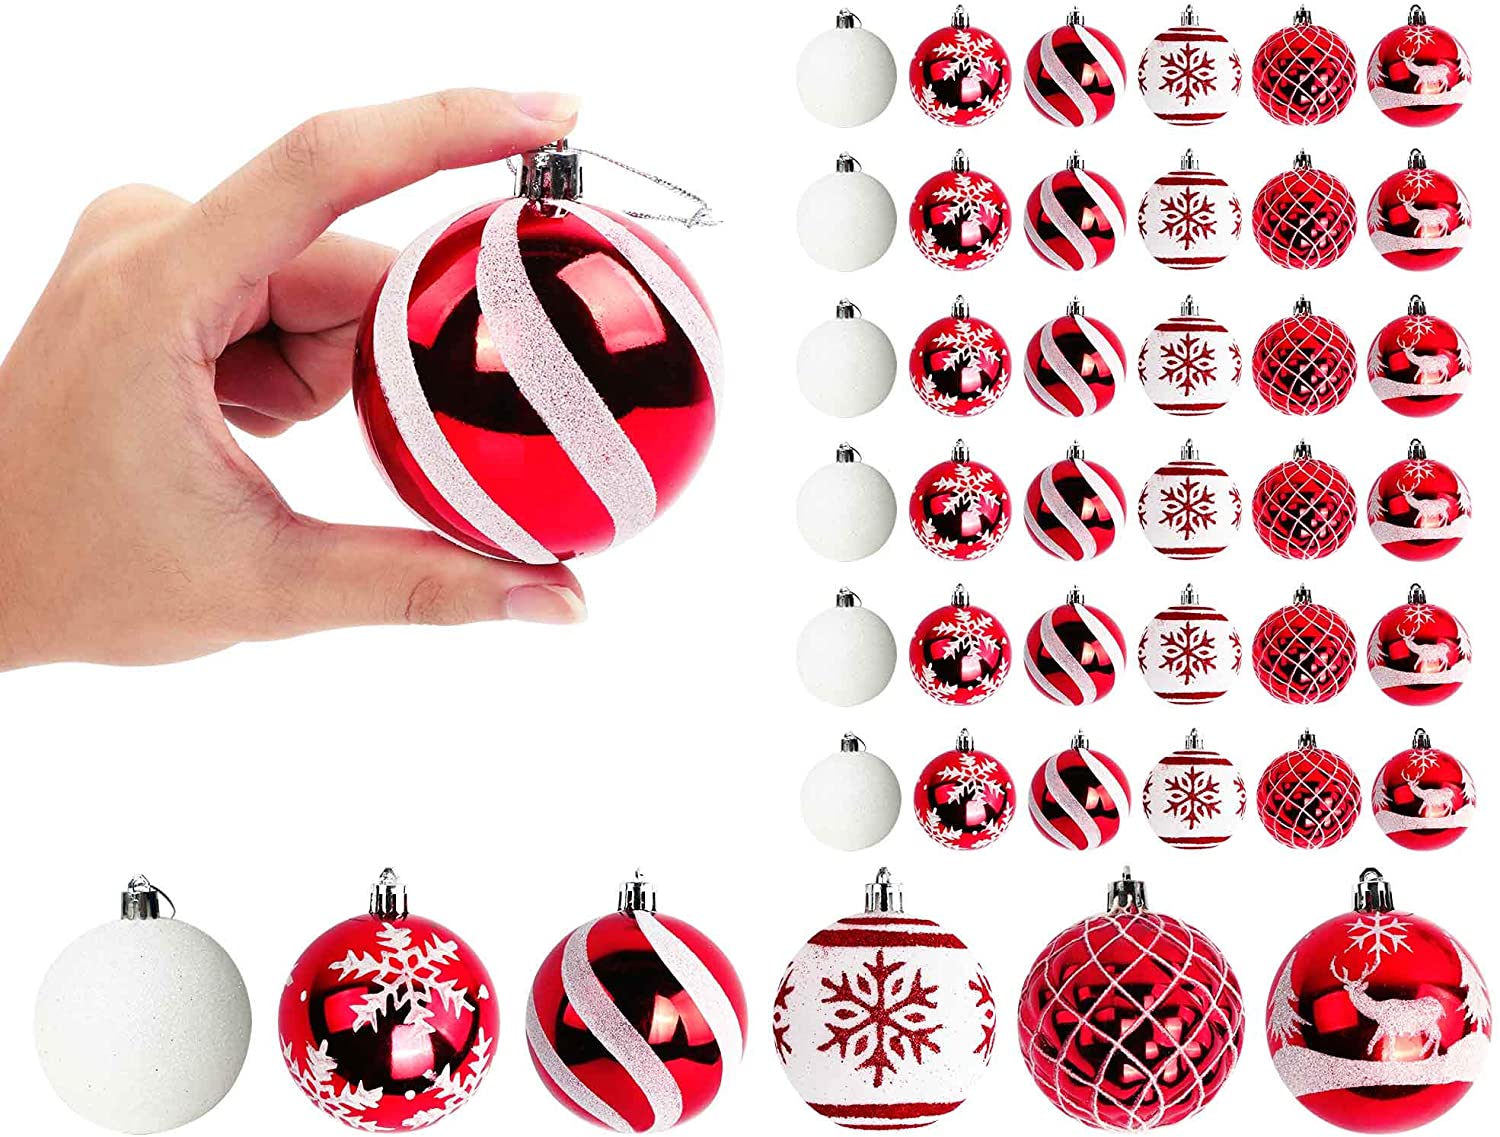 Sea Team 50-Pack Assorted Shatterproof Christmas Ball Ornaments Set Decorative Baubles Pendants with Premium Gift Wrapping Ribbon for Xmas Tree Red